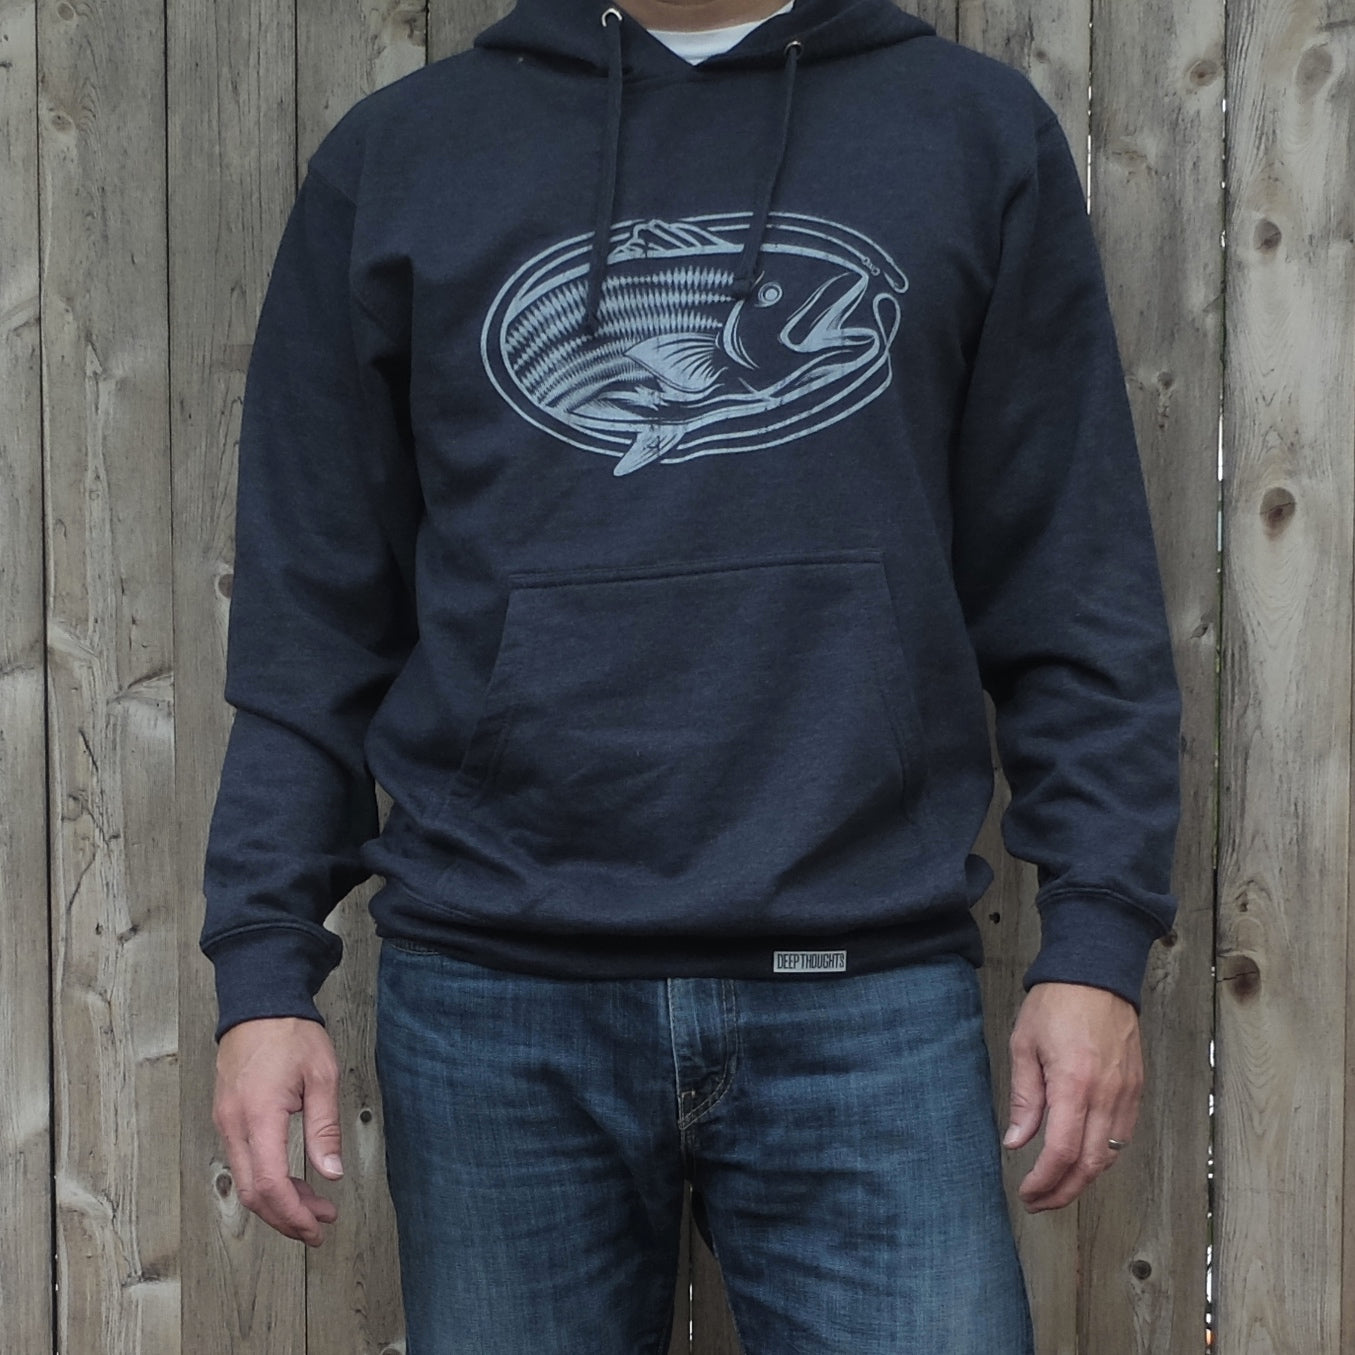 man wearing heather navy blue hoodie with vintage style white oval-shaped striped bass fishing graphic